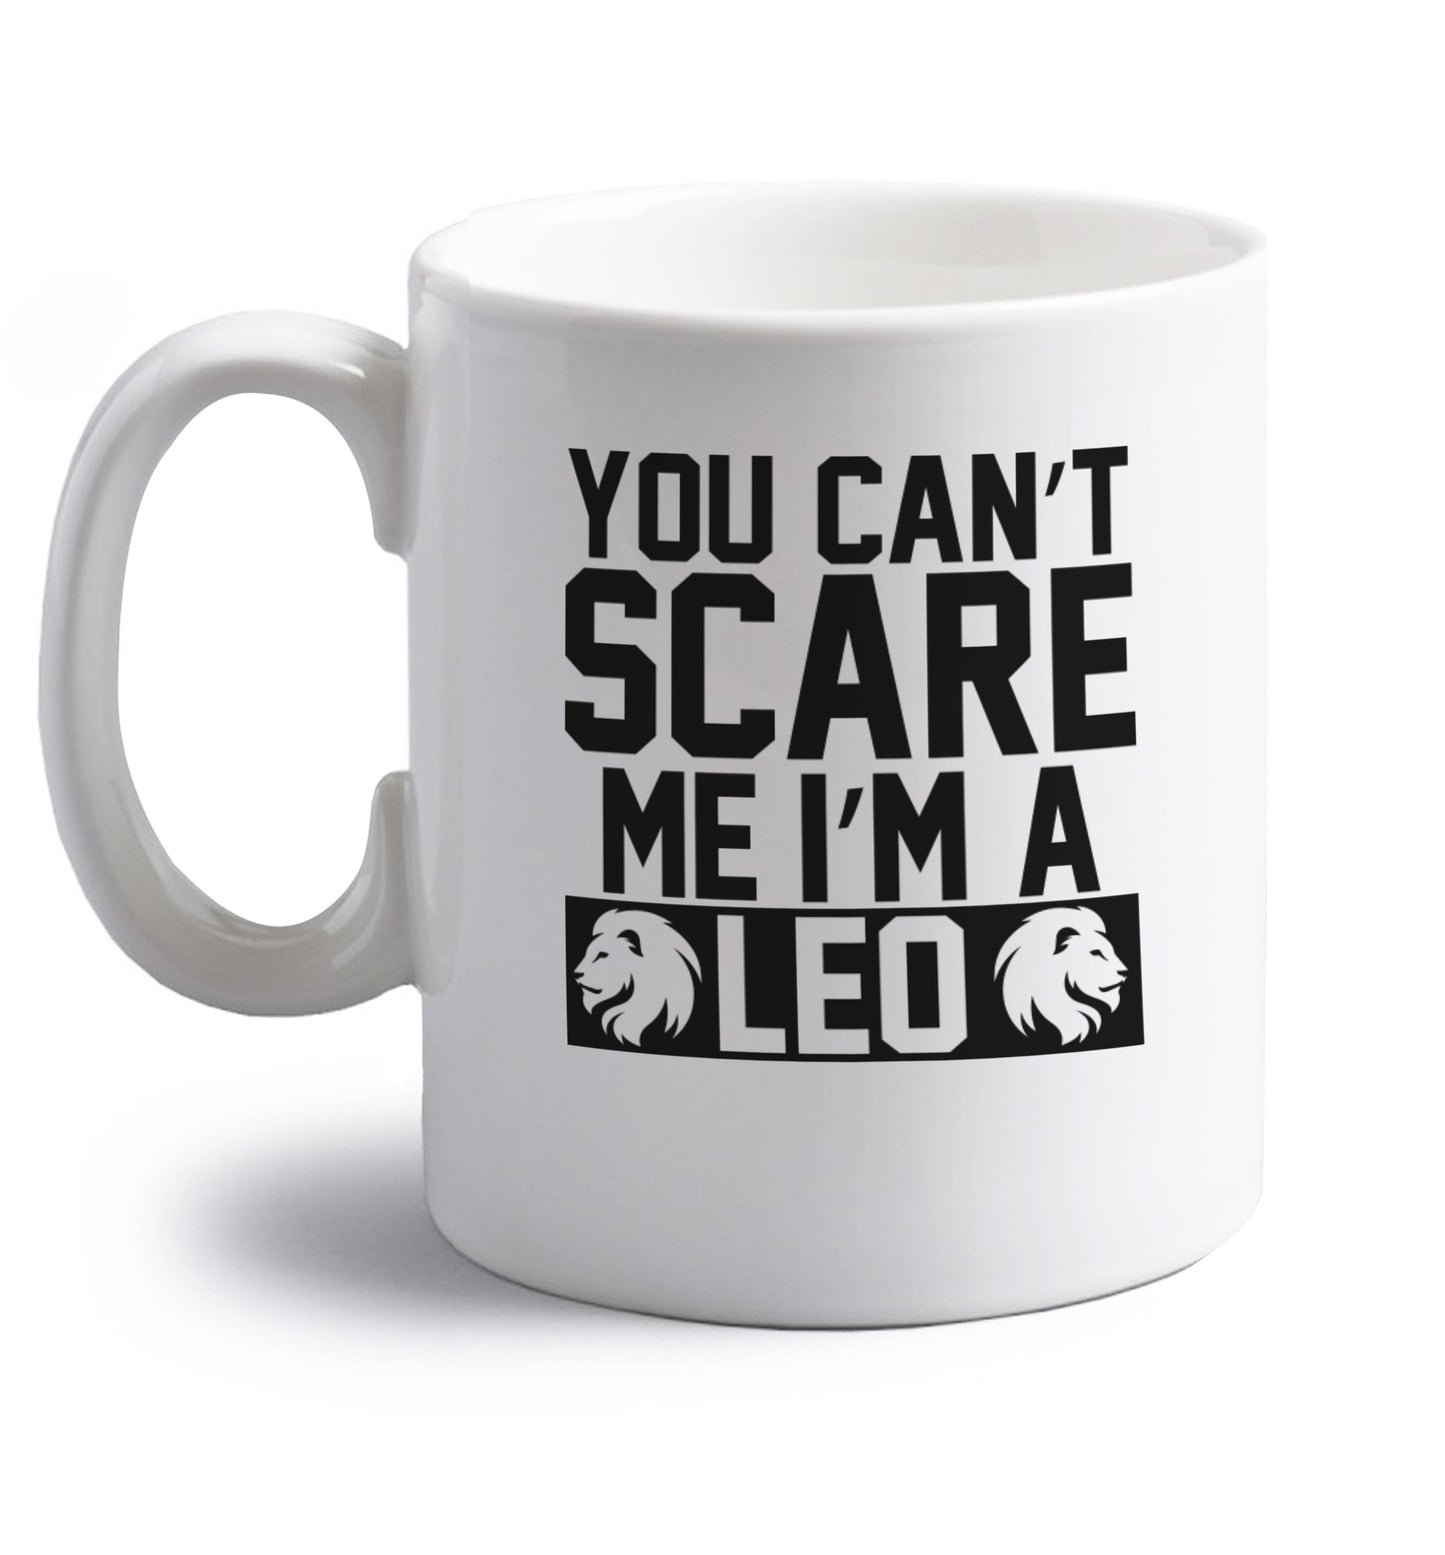 You can't scare me I'm a leo right handed white ceramic mug 